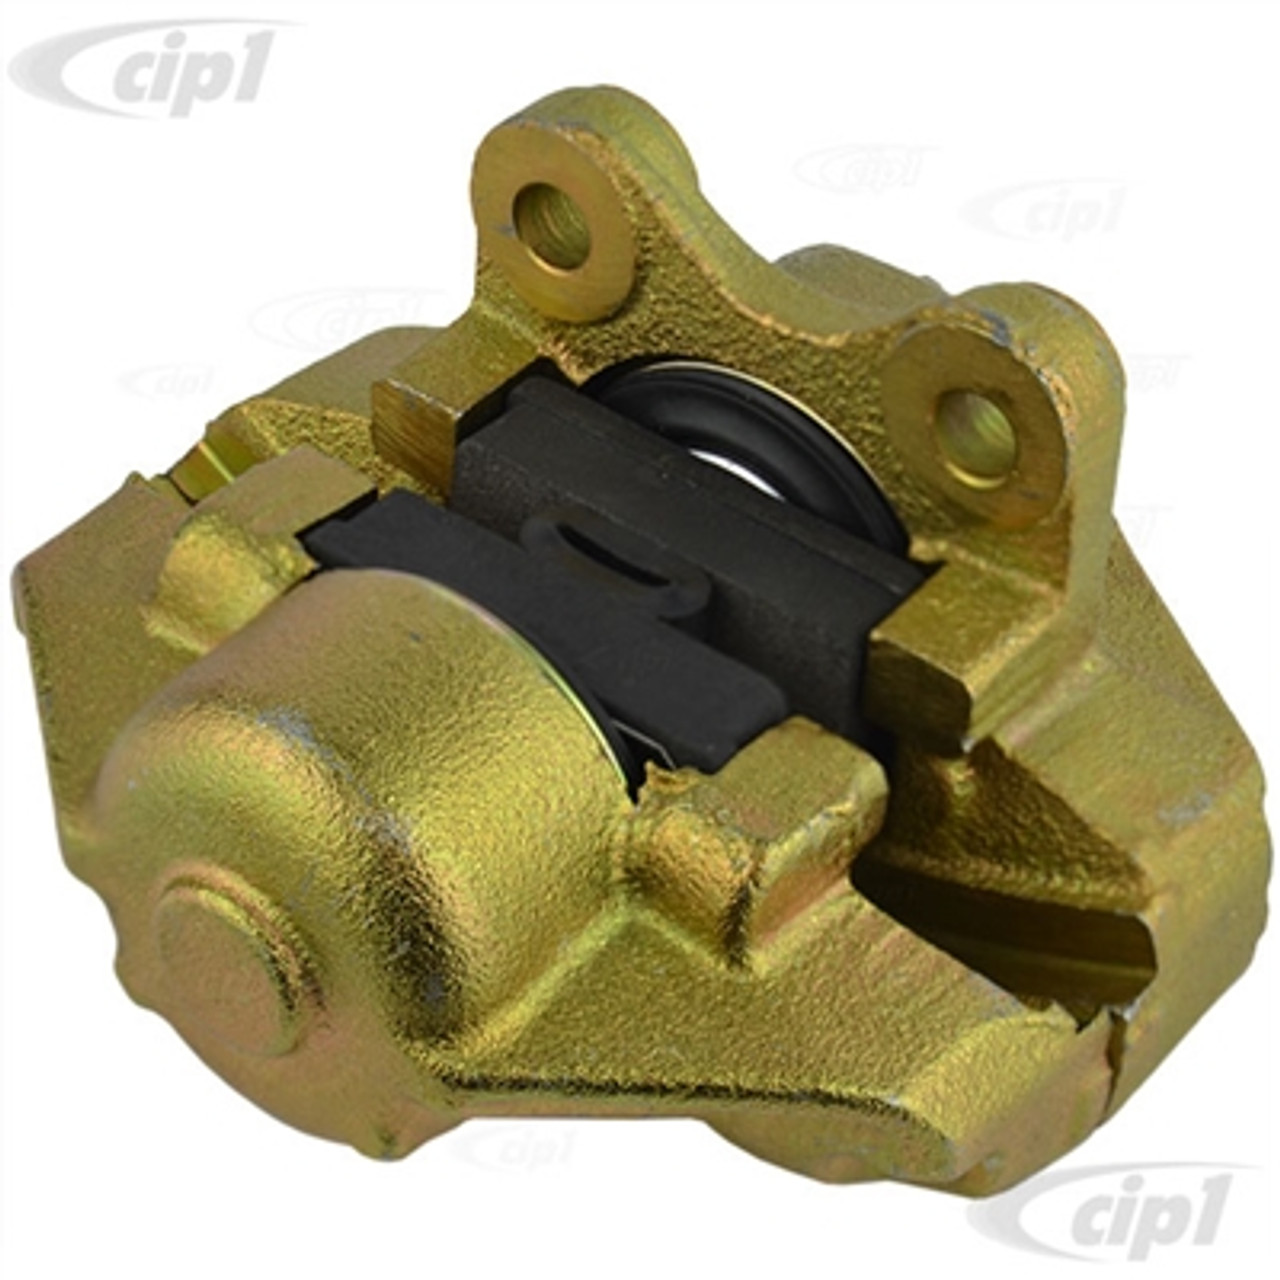 VWC-311-615-107-8EC - 3116151078EC - 98-1150-B - TOP QUALITY REPRODUCTION -  BRAKE CALIPER WITH PADS - FITS LEFT OR RIGHT SIDE - BEETLE 66-79 / GHIA